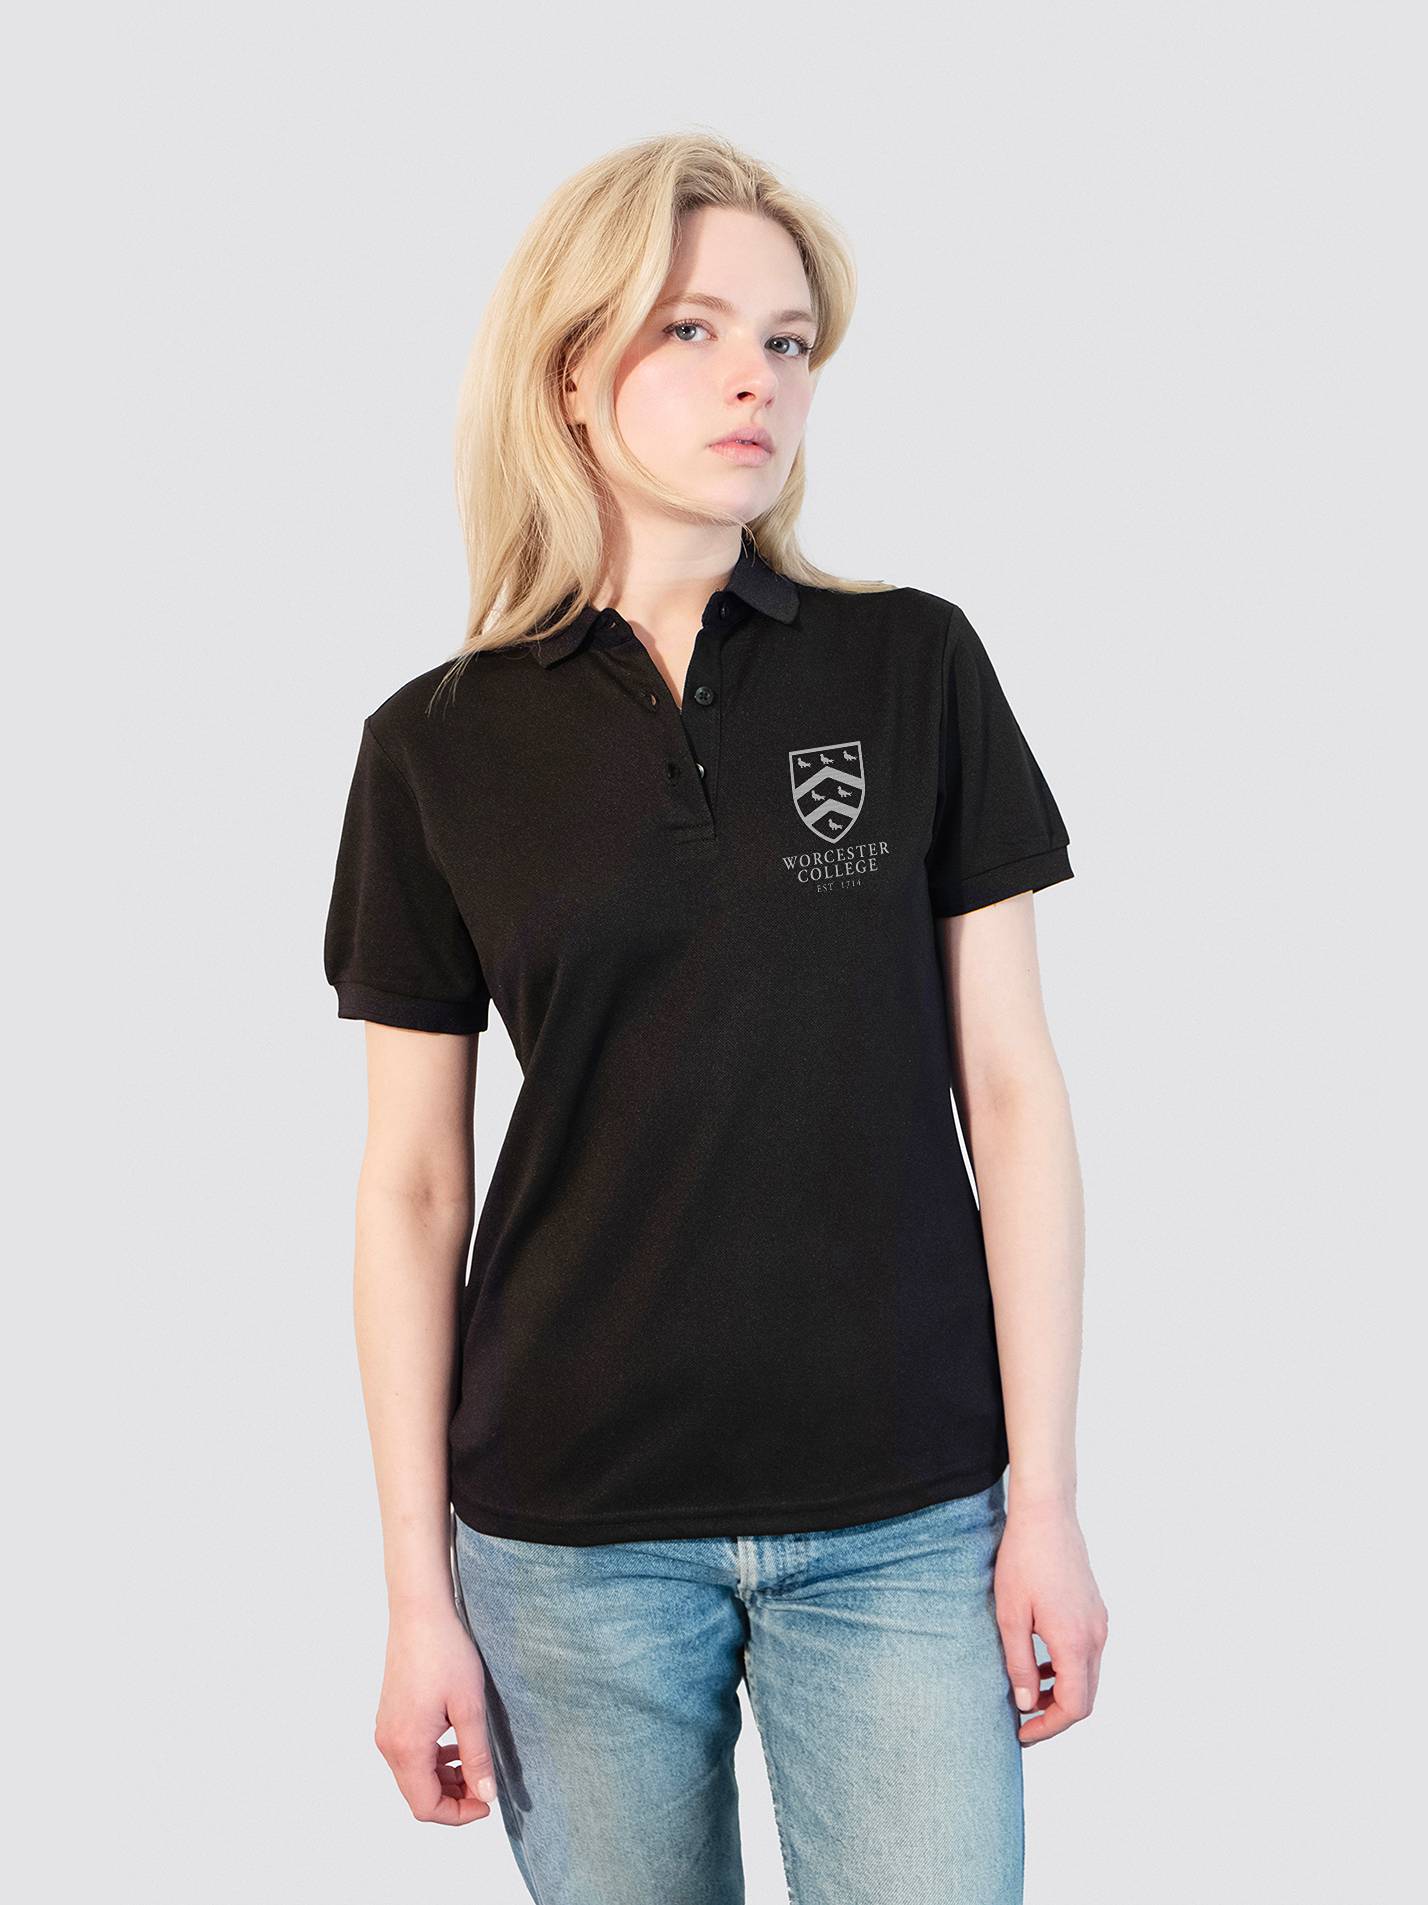 Worcester College Oxford JCR Sustainable Ladies Polo Shirt